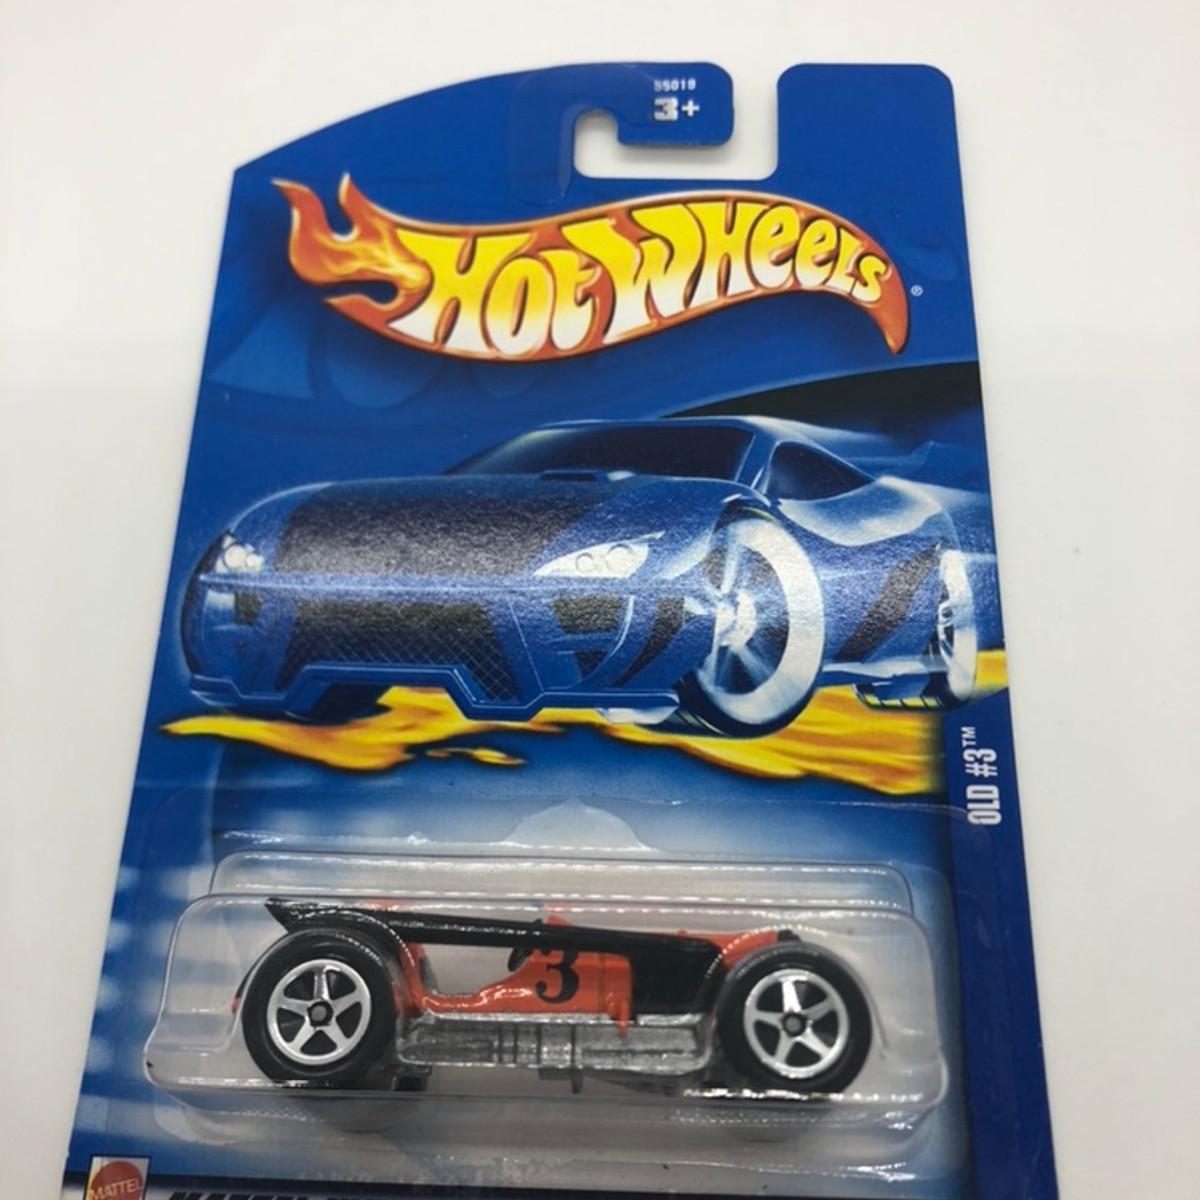 2002 Hot wheels Old # 3 Painted Base Version